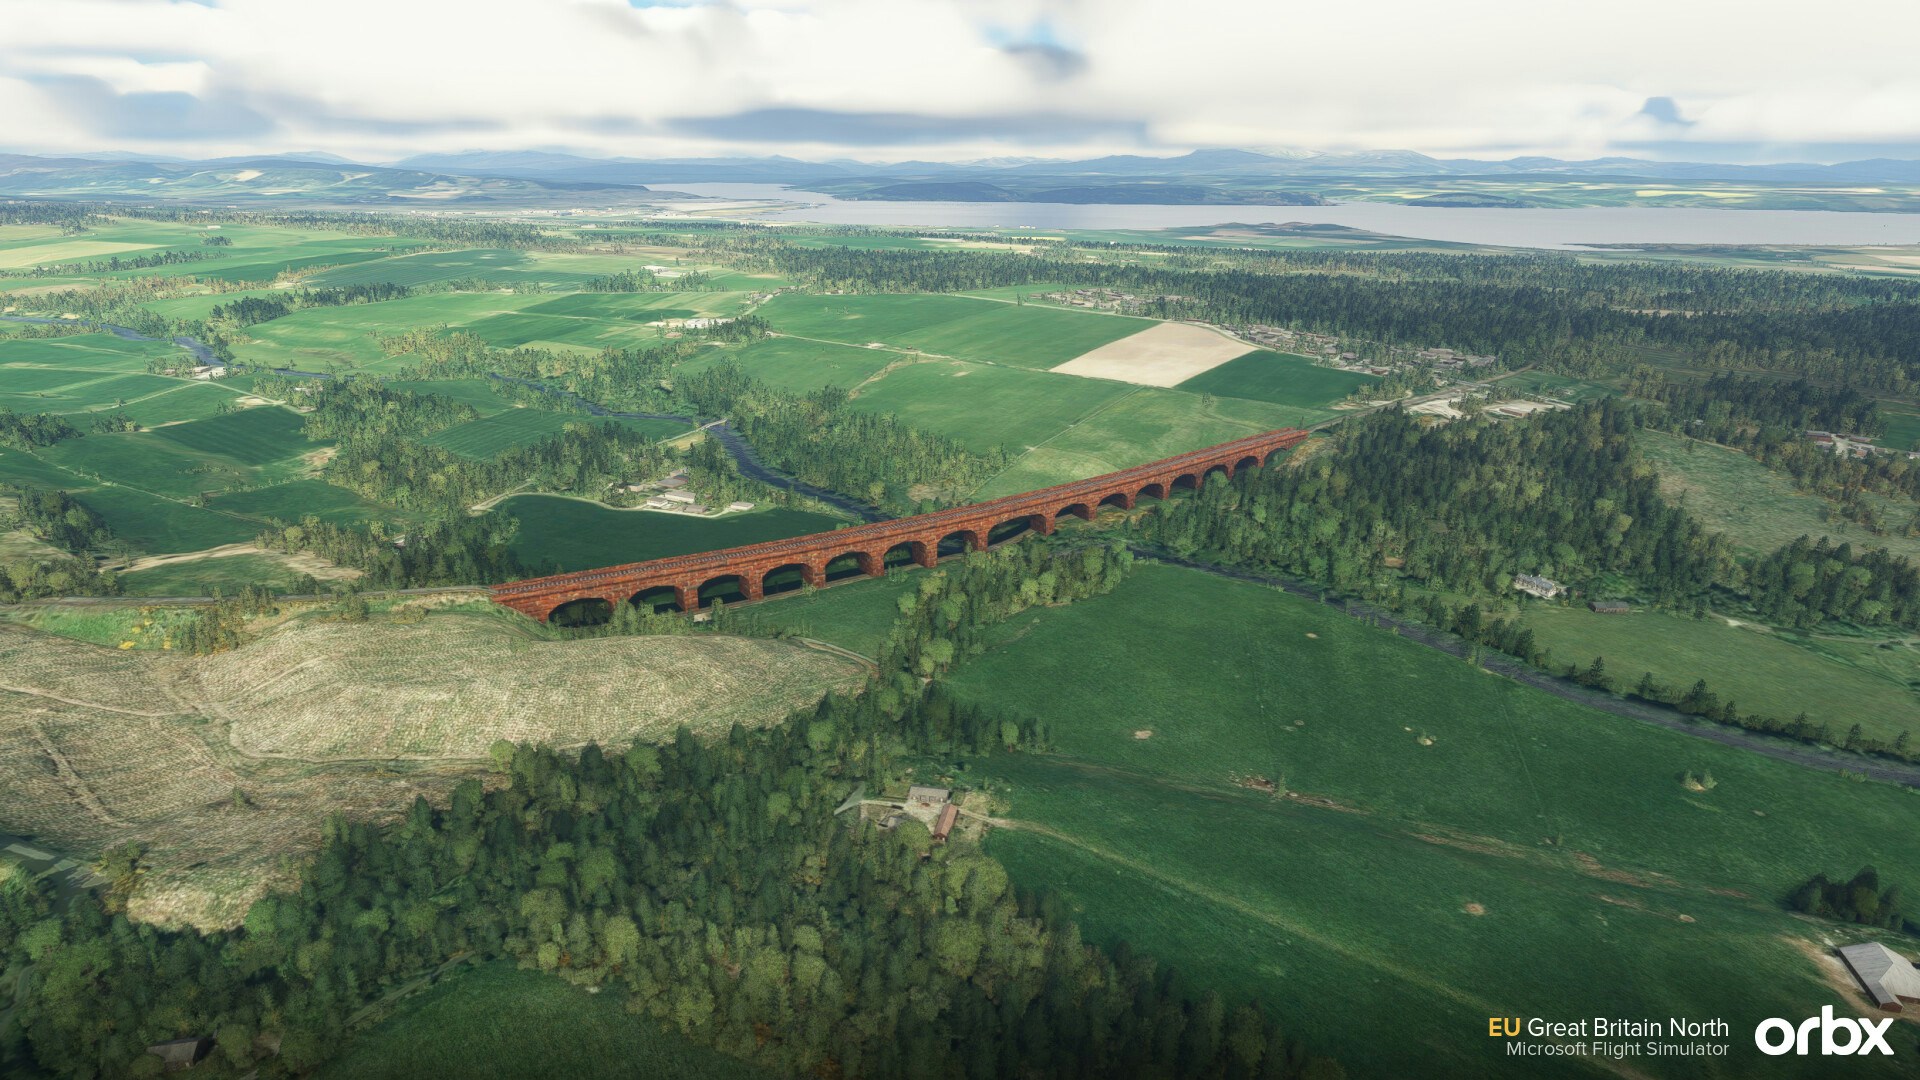 EU Great Britain North by Orbx is Now Available for MSFS